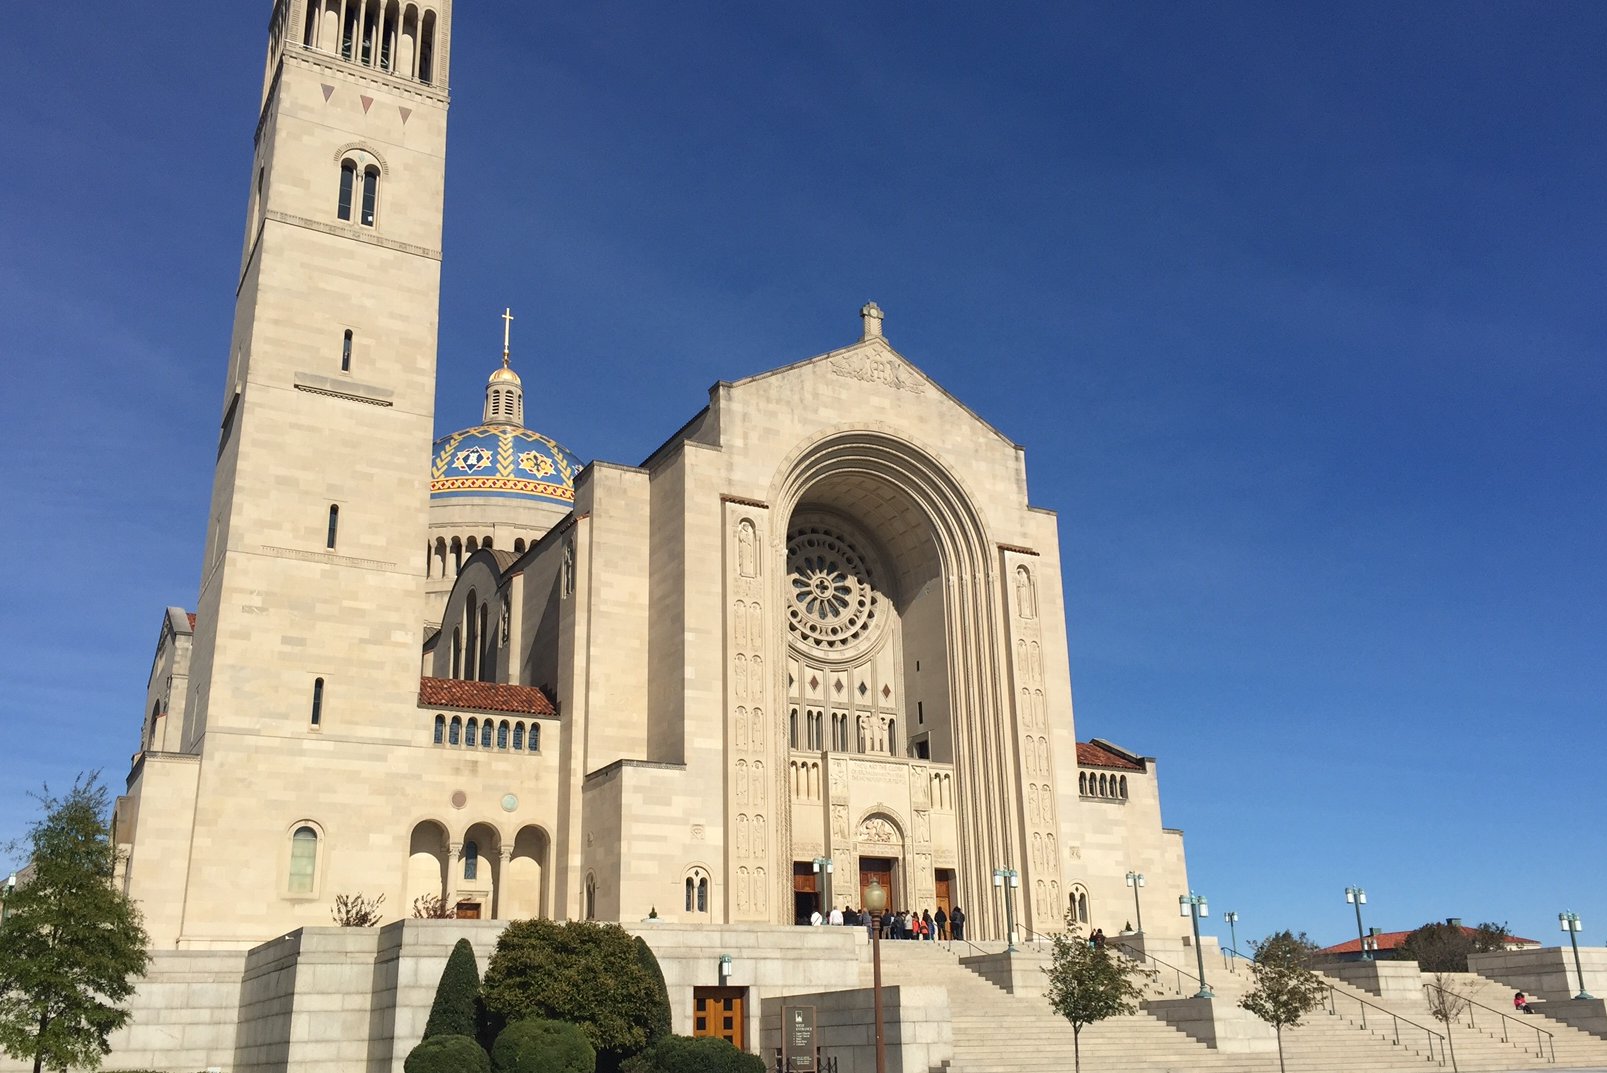 The Basilica of the National Shrine of the Immaculate Conception in northeast Washington. (WTOP/Megan Cloherty)